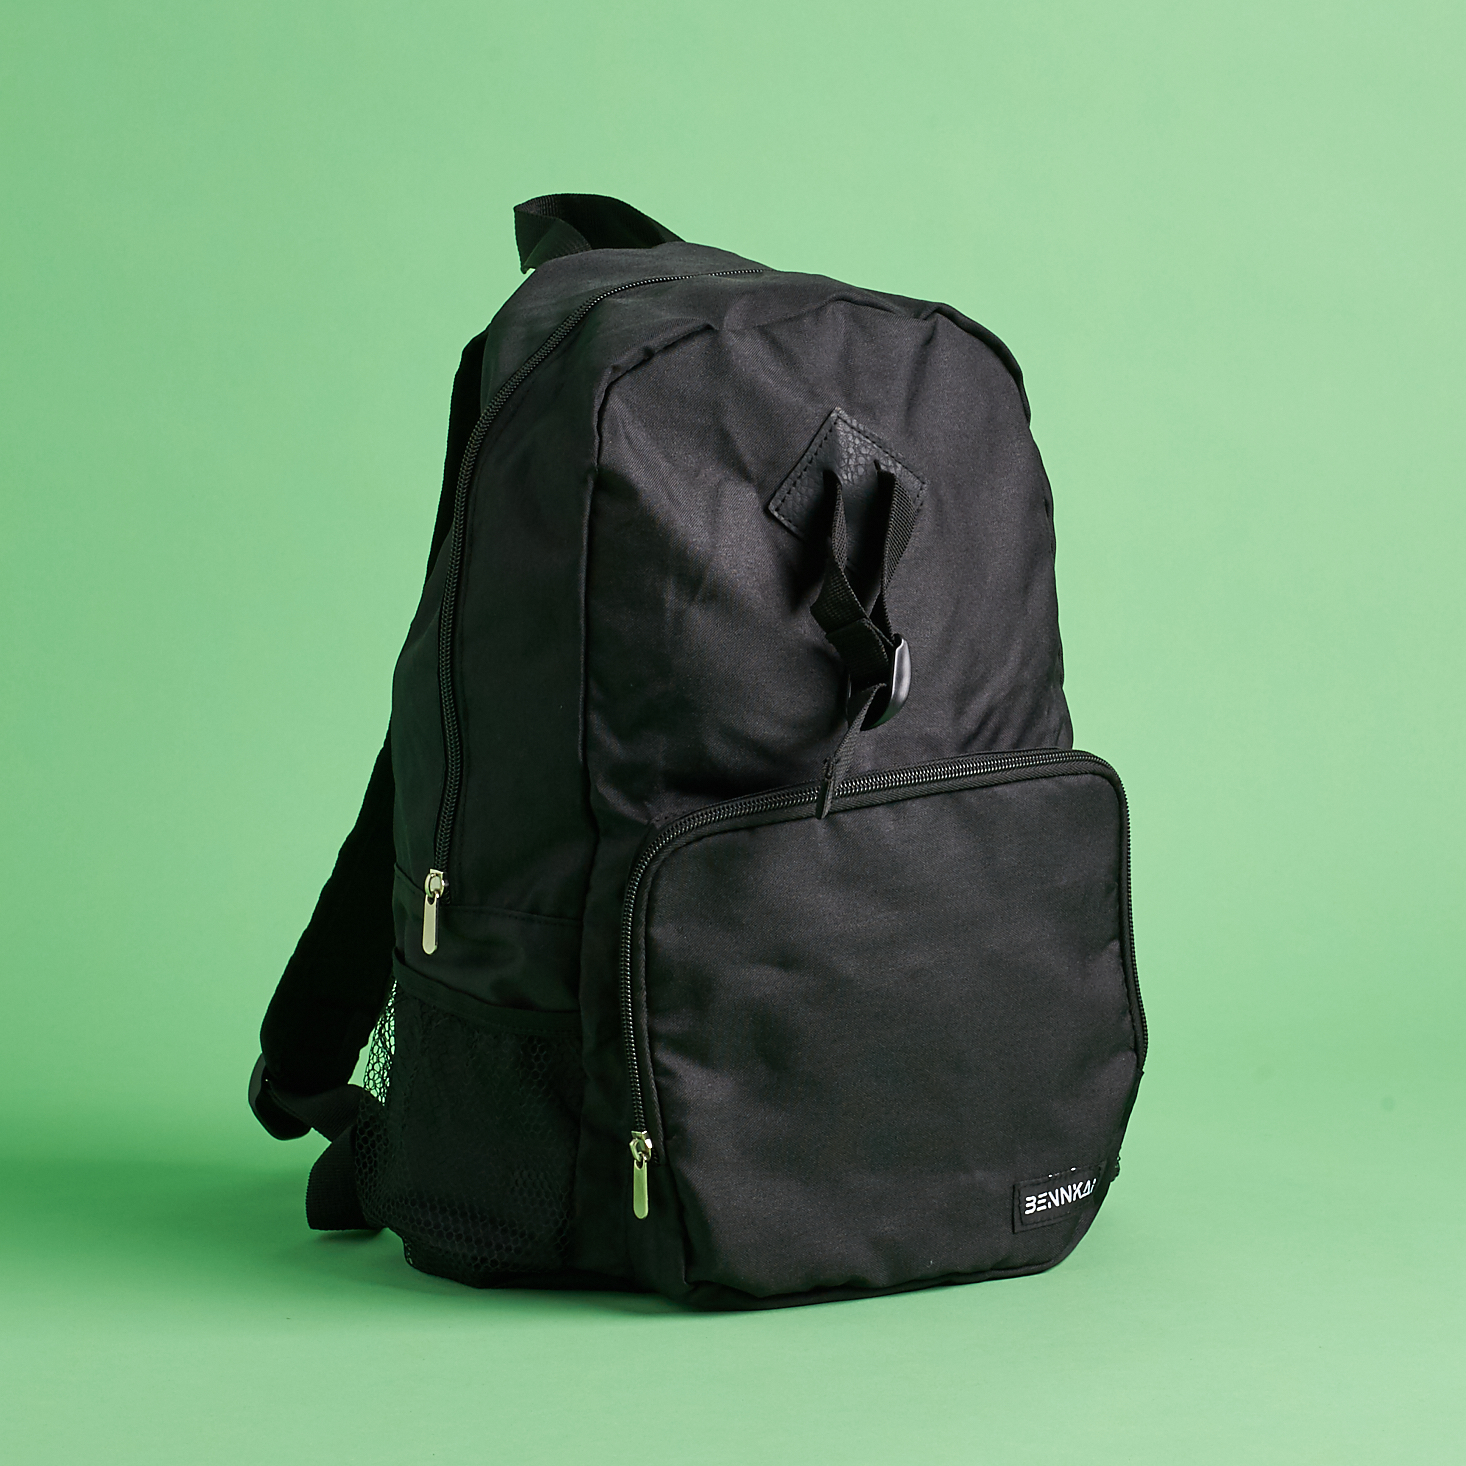 Bennkai Collapsible Backpack - fully expanded